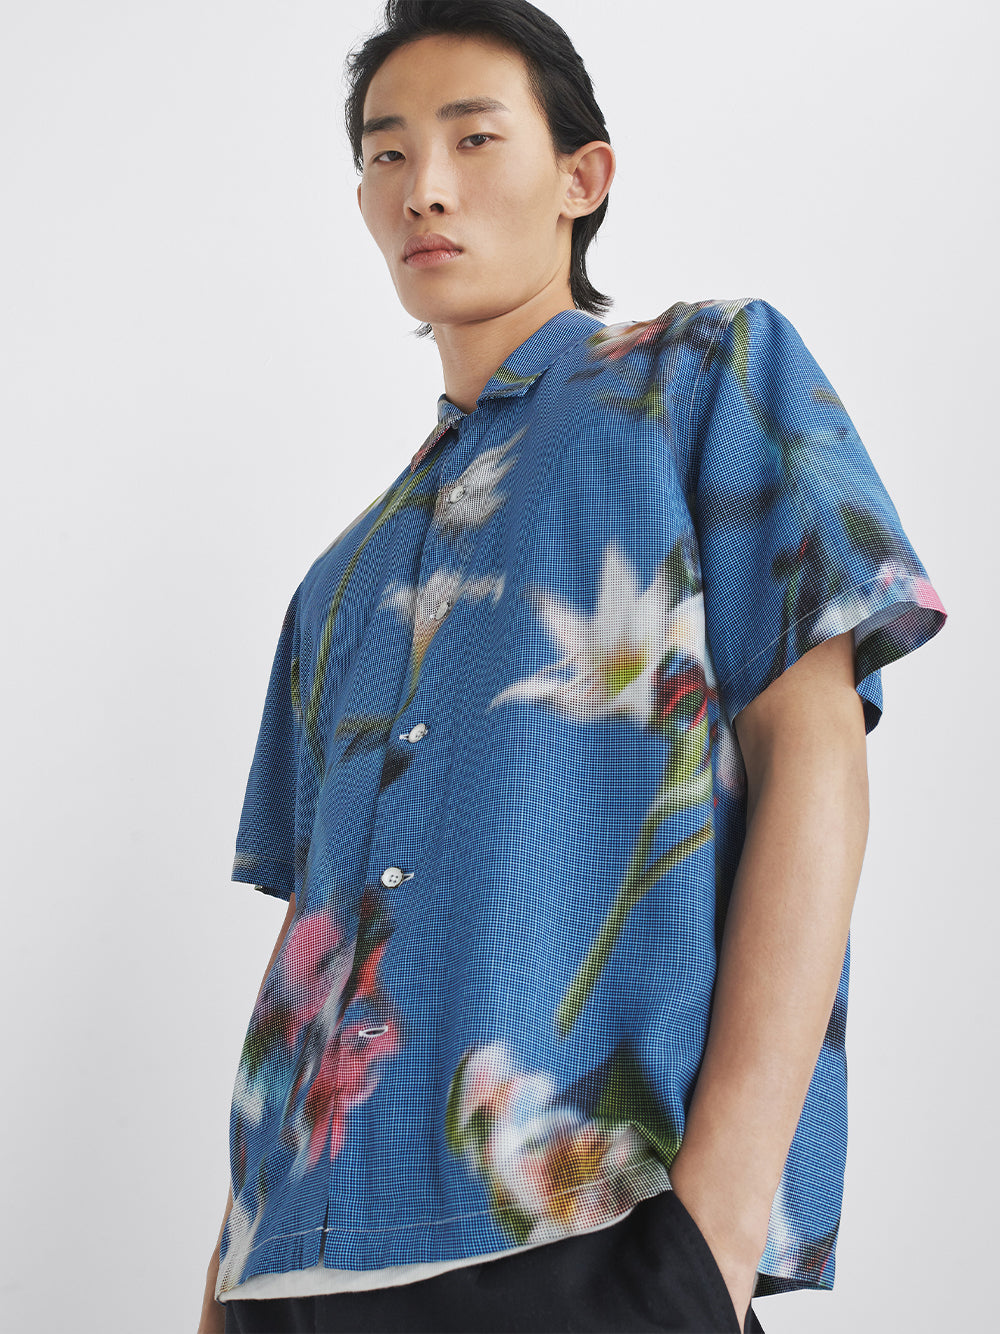 Printed Avery Shirt Blue floral